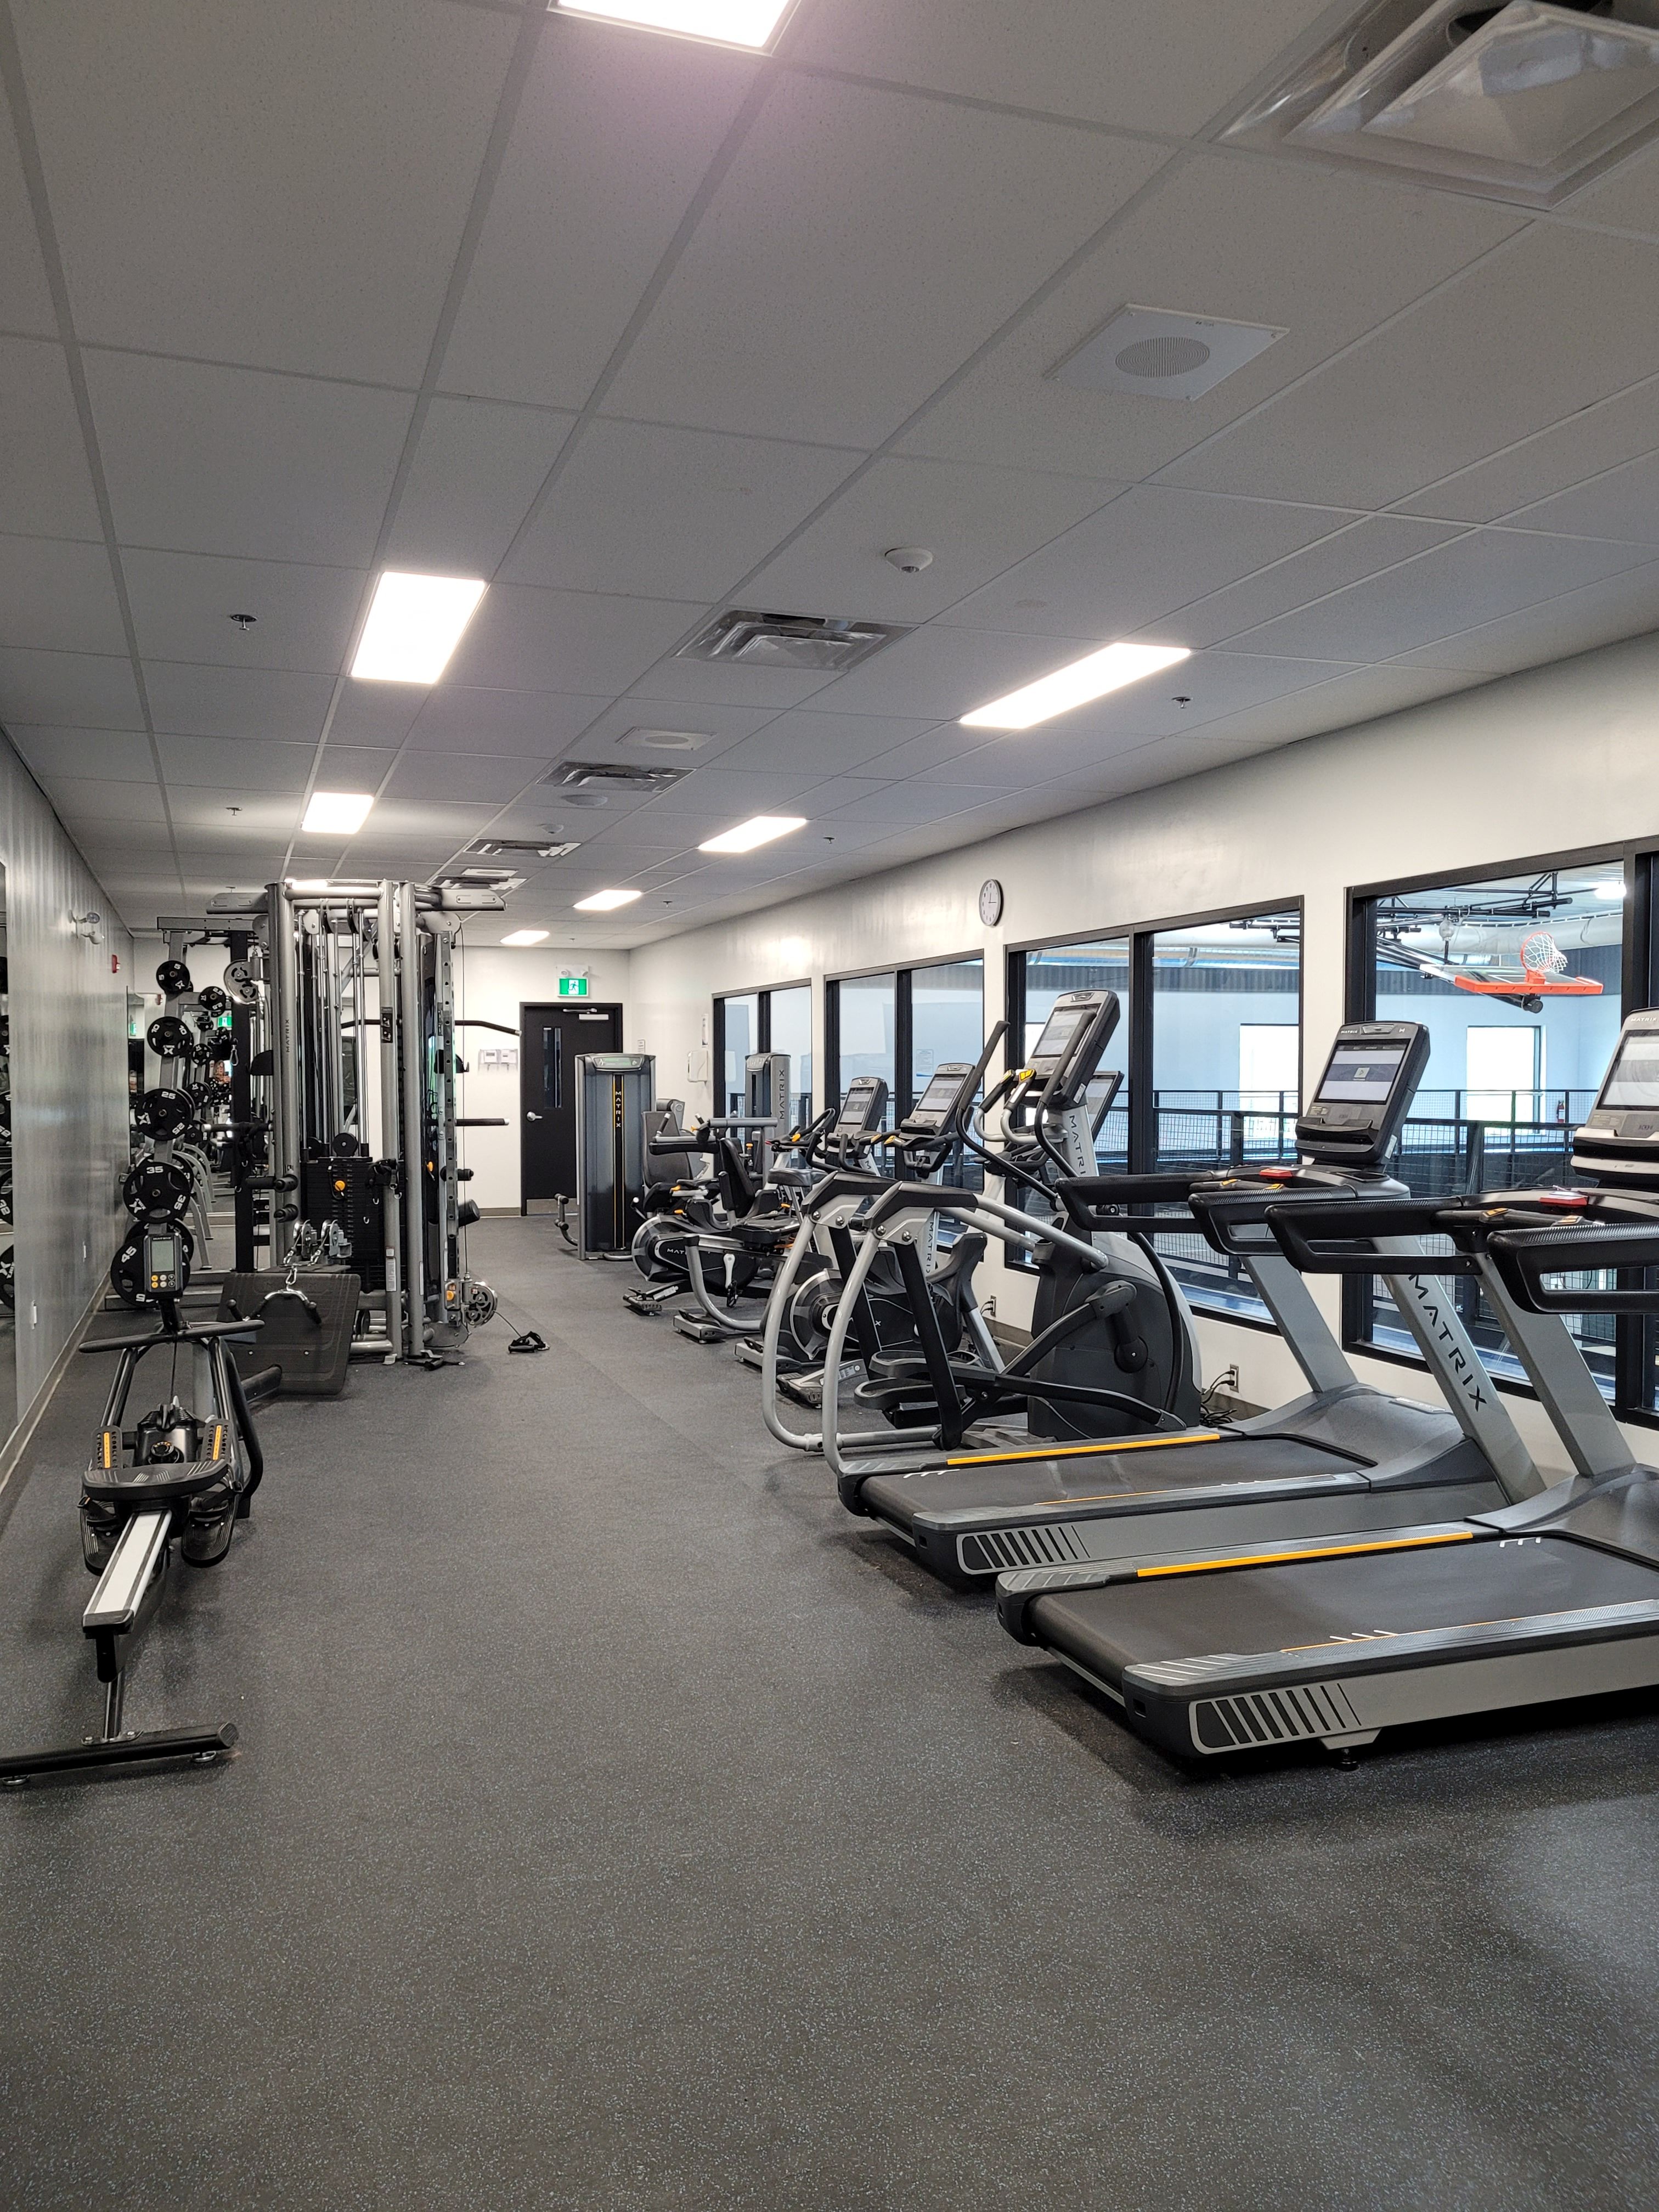 Fitness Room with equipment